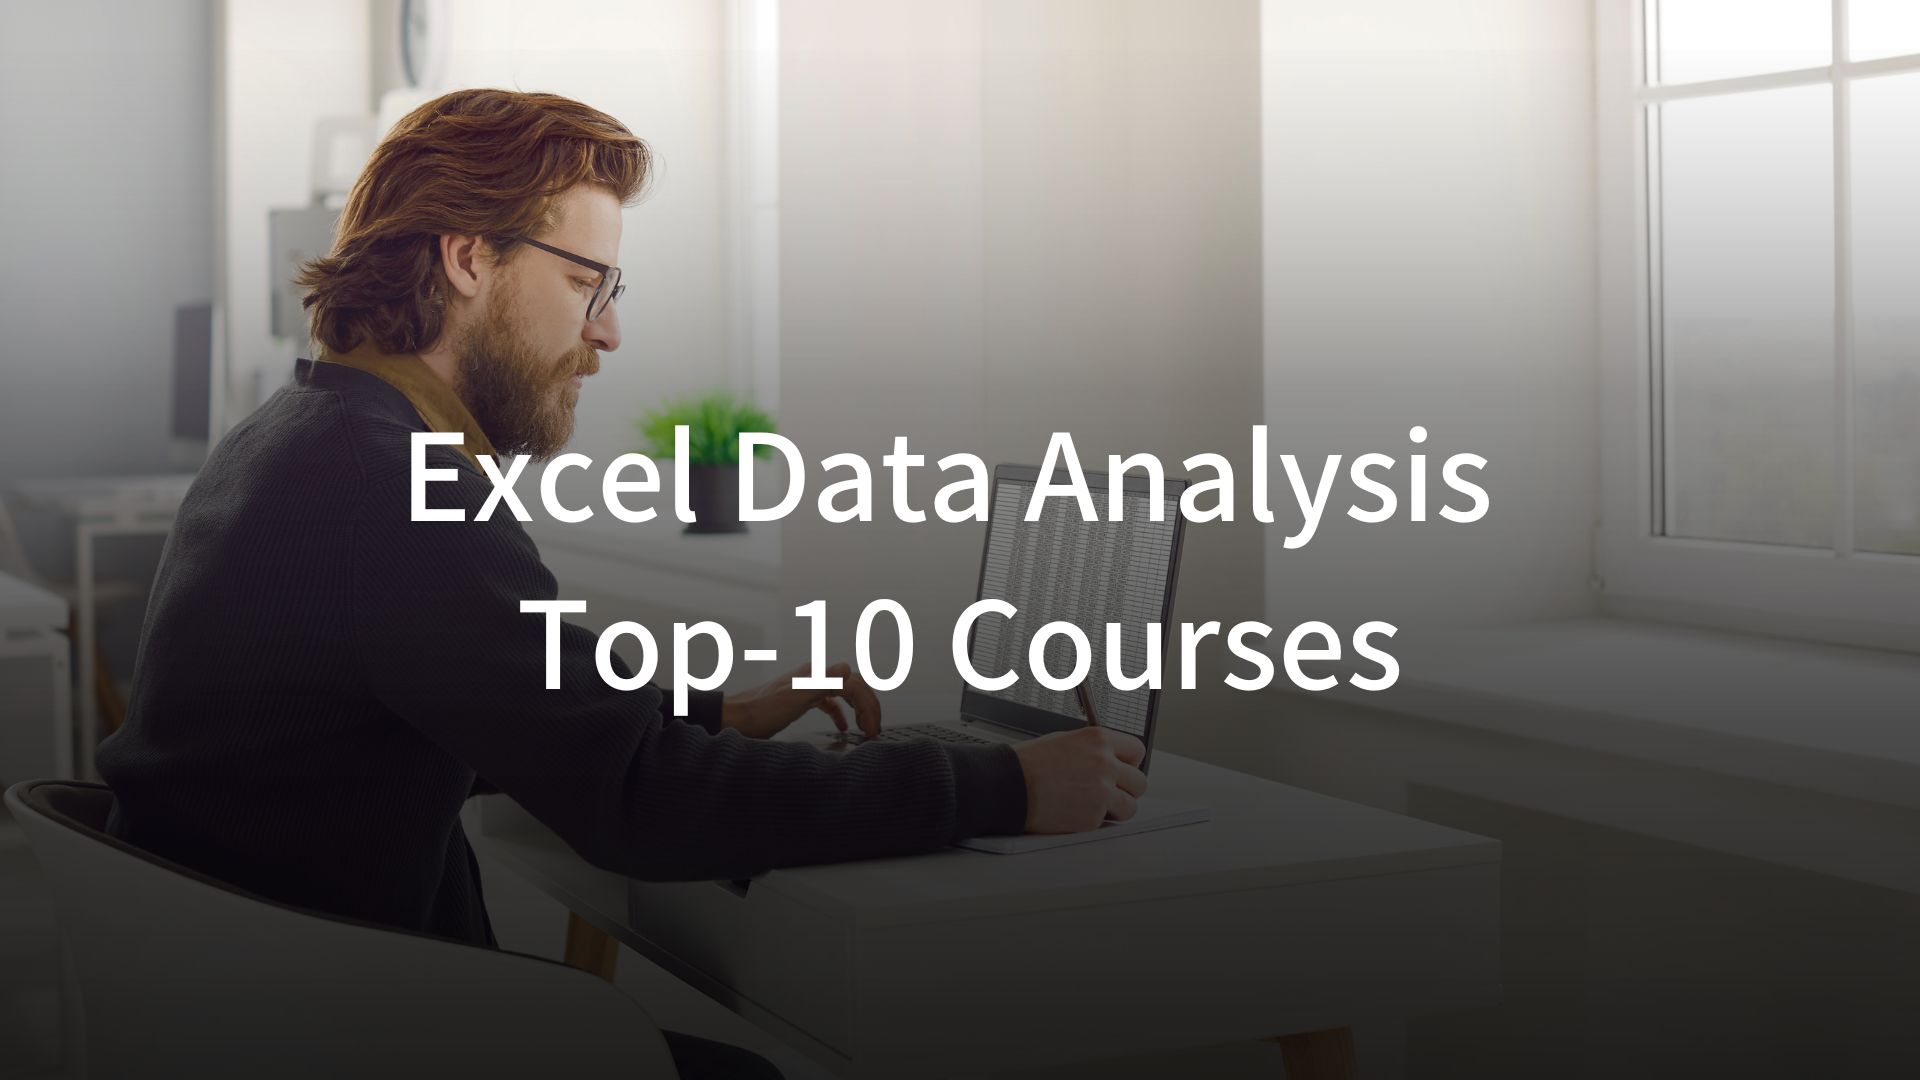 Excel Data Analysis Top-10 Courses